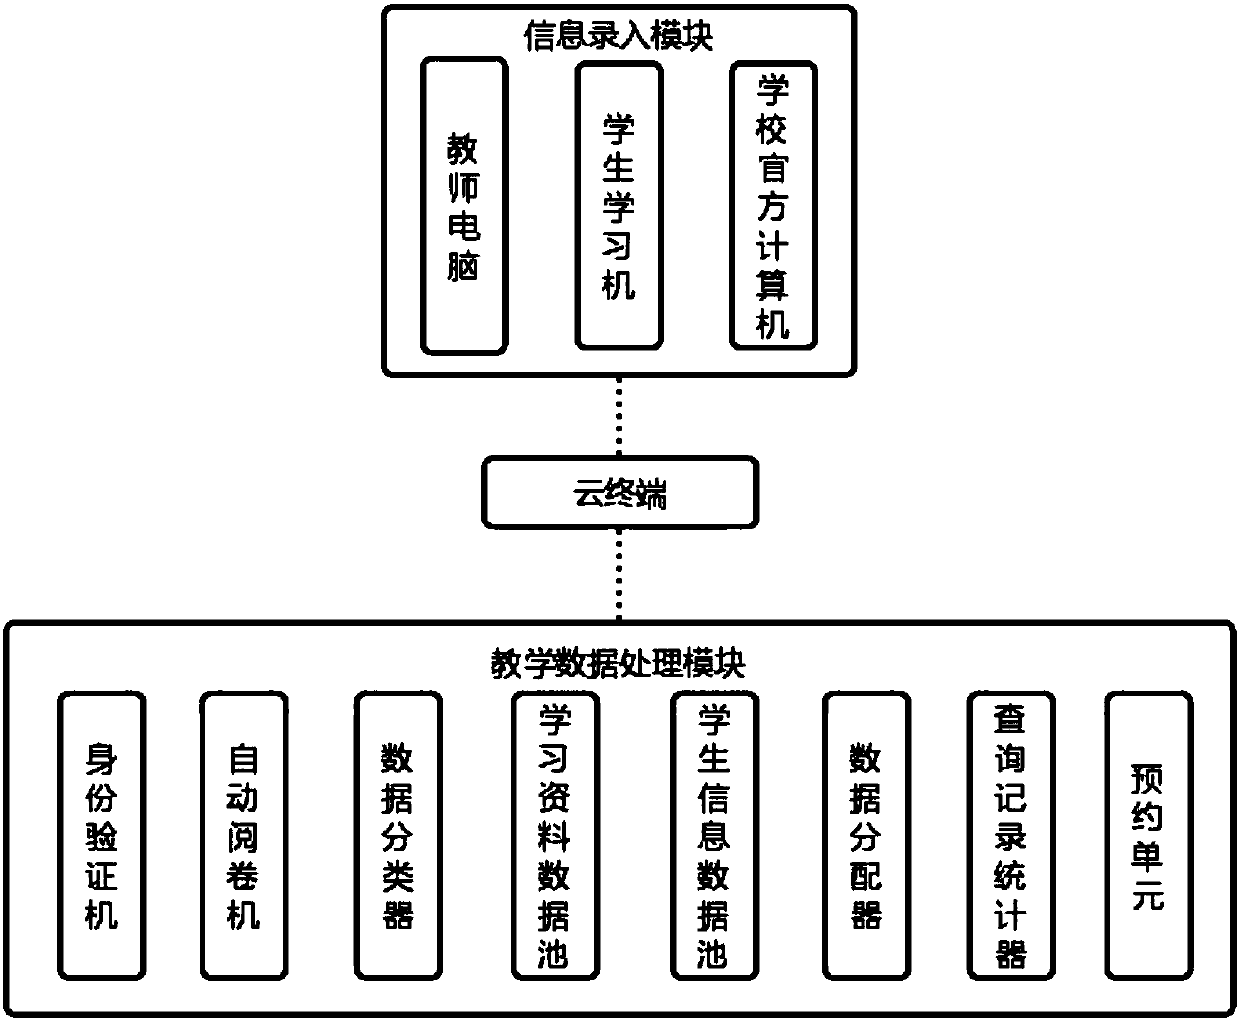 Cloud computing system for school education and implementation method